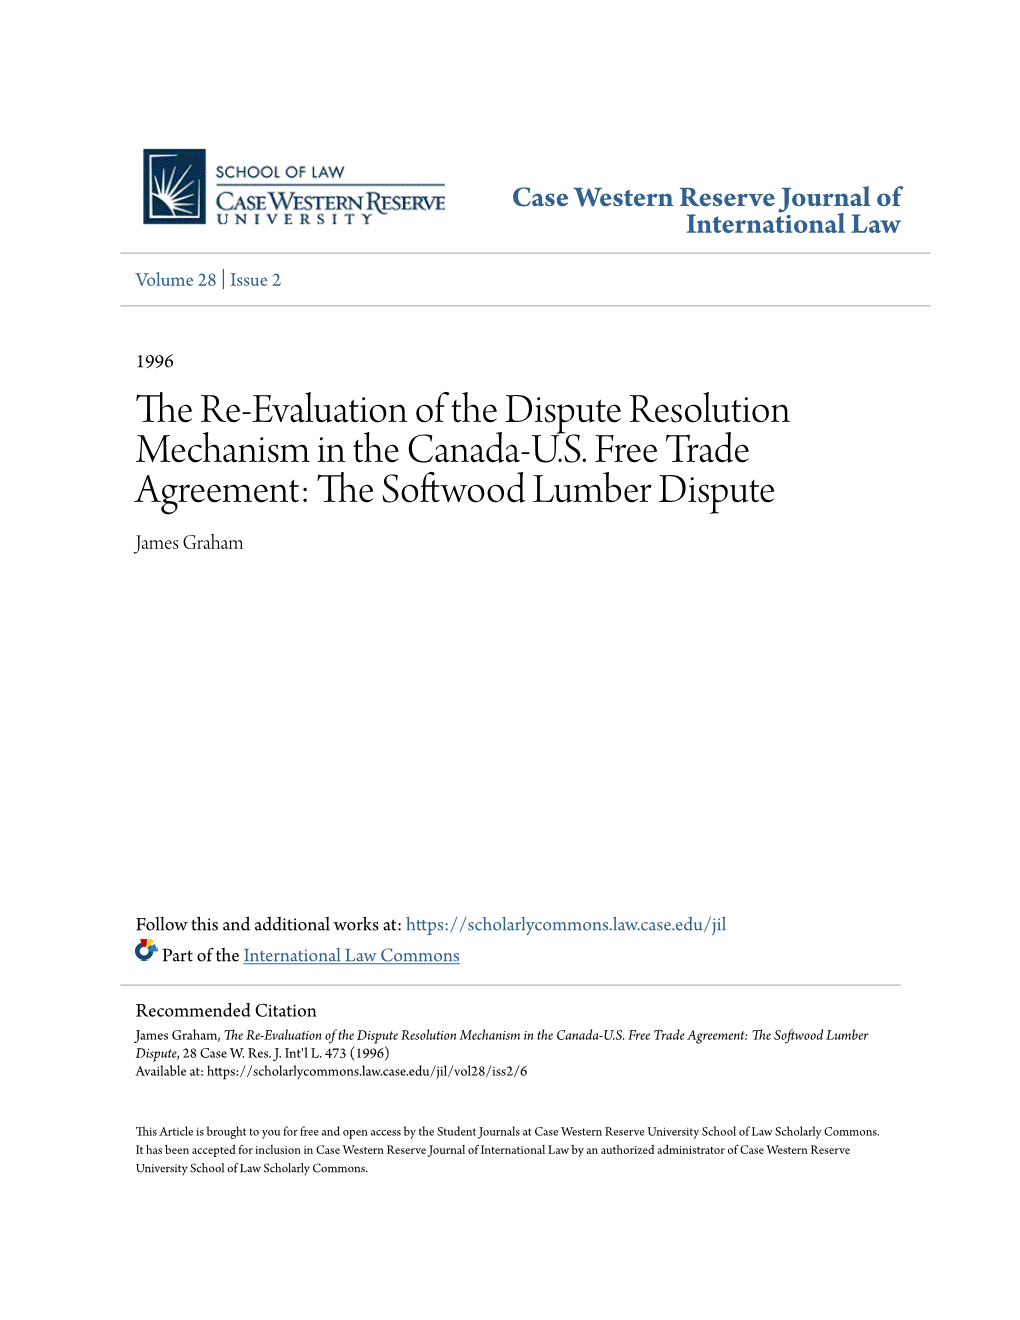 The Re-Evaluation of the Dispute Resolution Mechanism in the Canada-U.S. Free Trade Agreement: the Ofts Wood Lumber Dispute James Graham